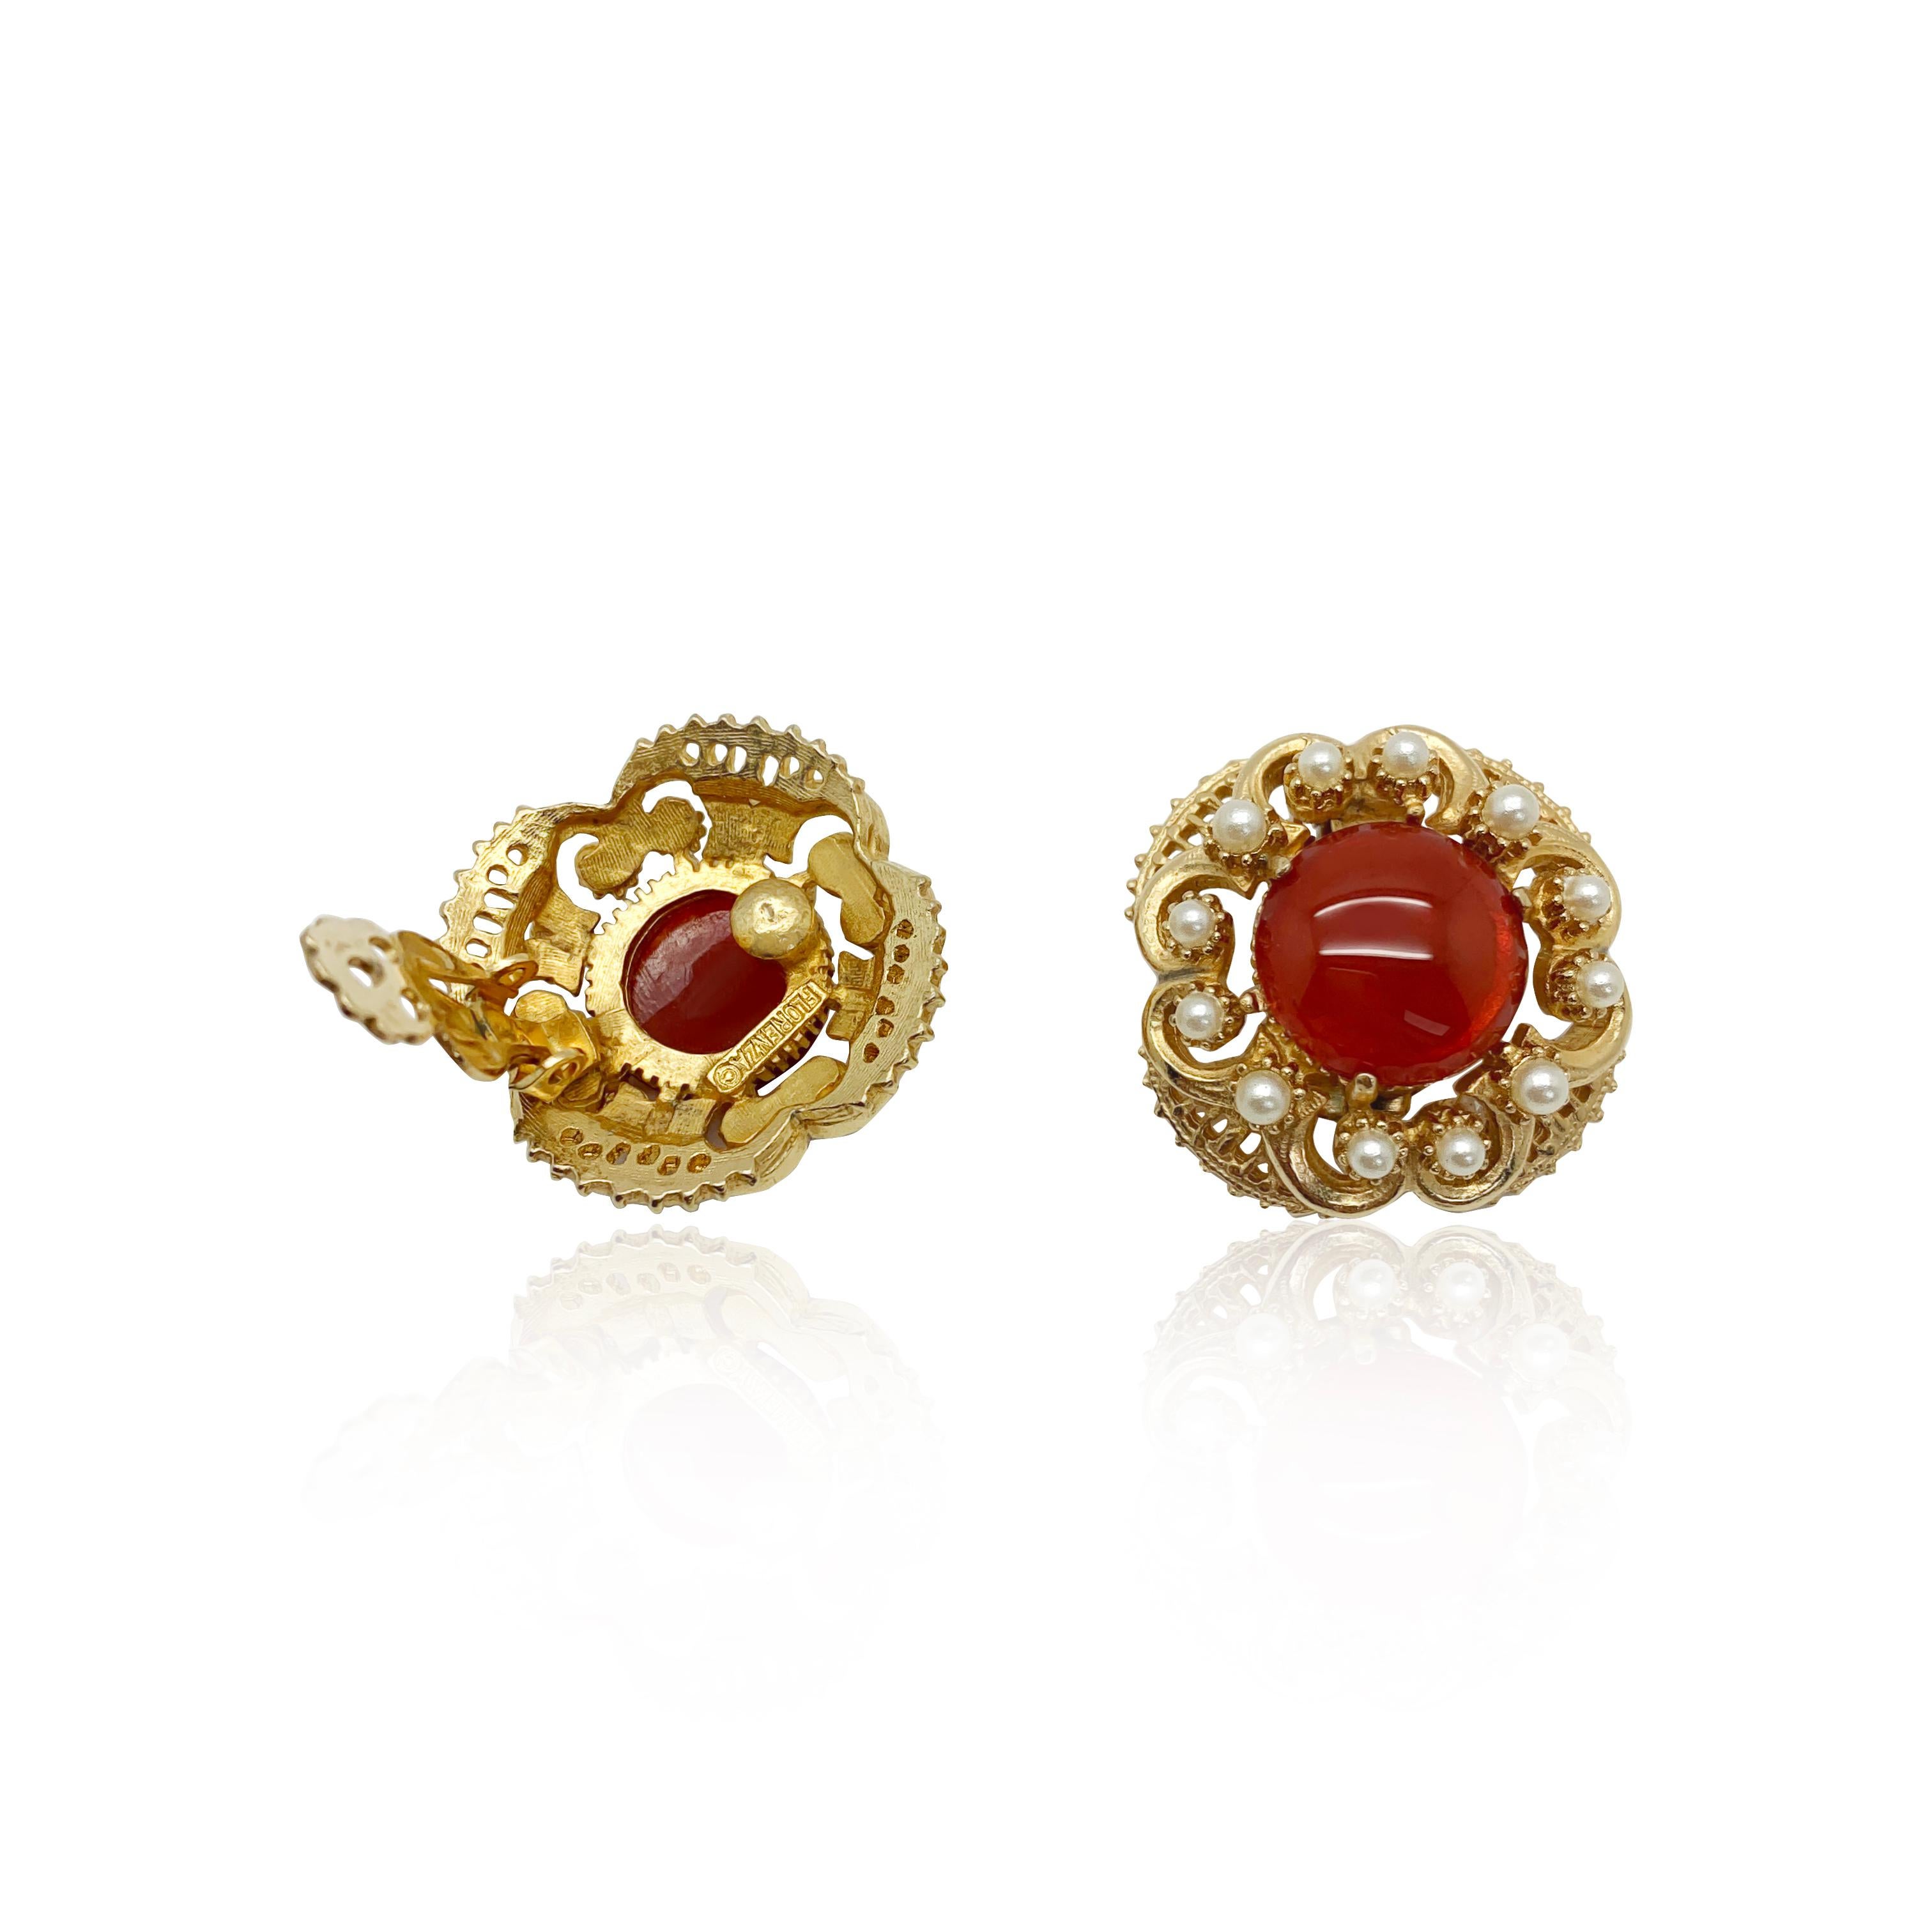 Vintage Florenza Cabochon Earrings. Beautifully made and featuring a large carnelian glass cabochon surrounded by whole faux pearls in a delightfully ornate gold setting. 
Vintage Condition: Very good without damage or noteworthy wear. 
Materials: